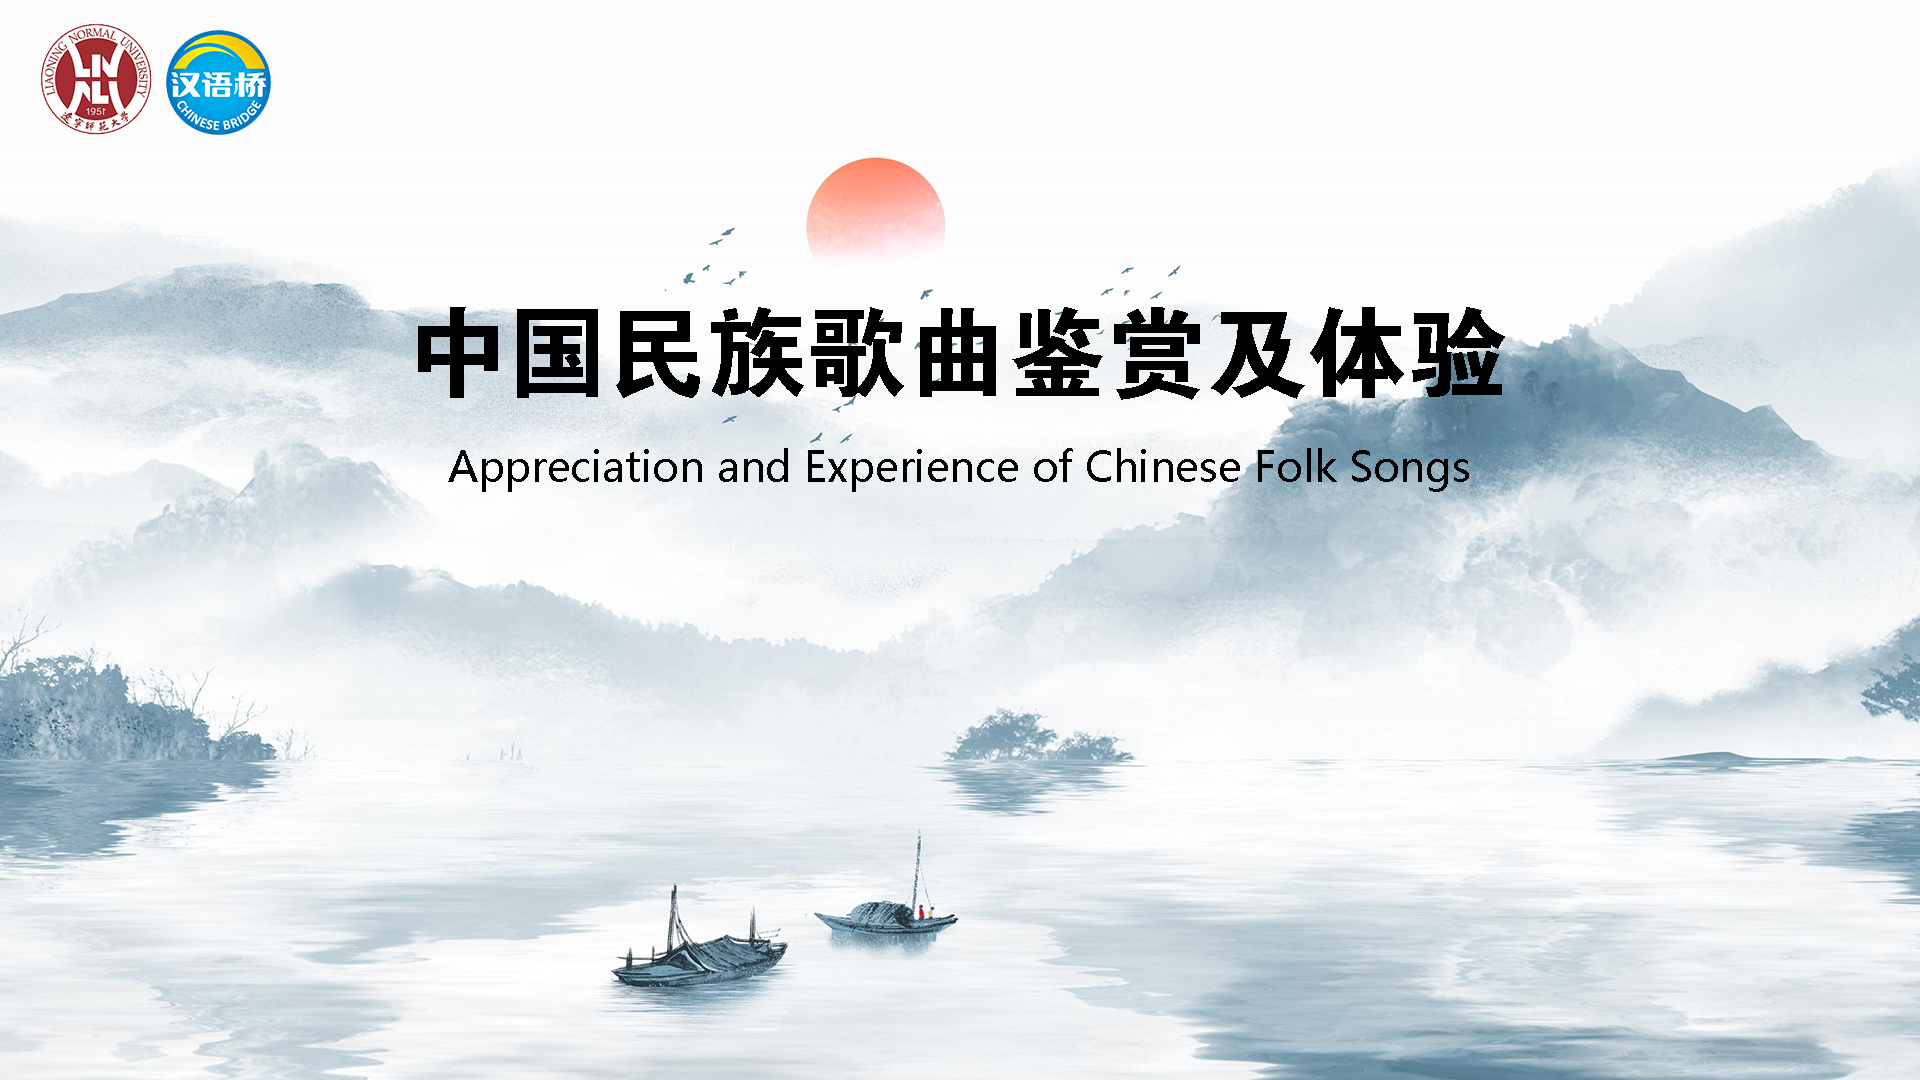 Appreciation and Experience of Chinese Folk Songs